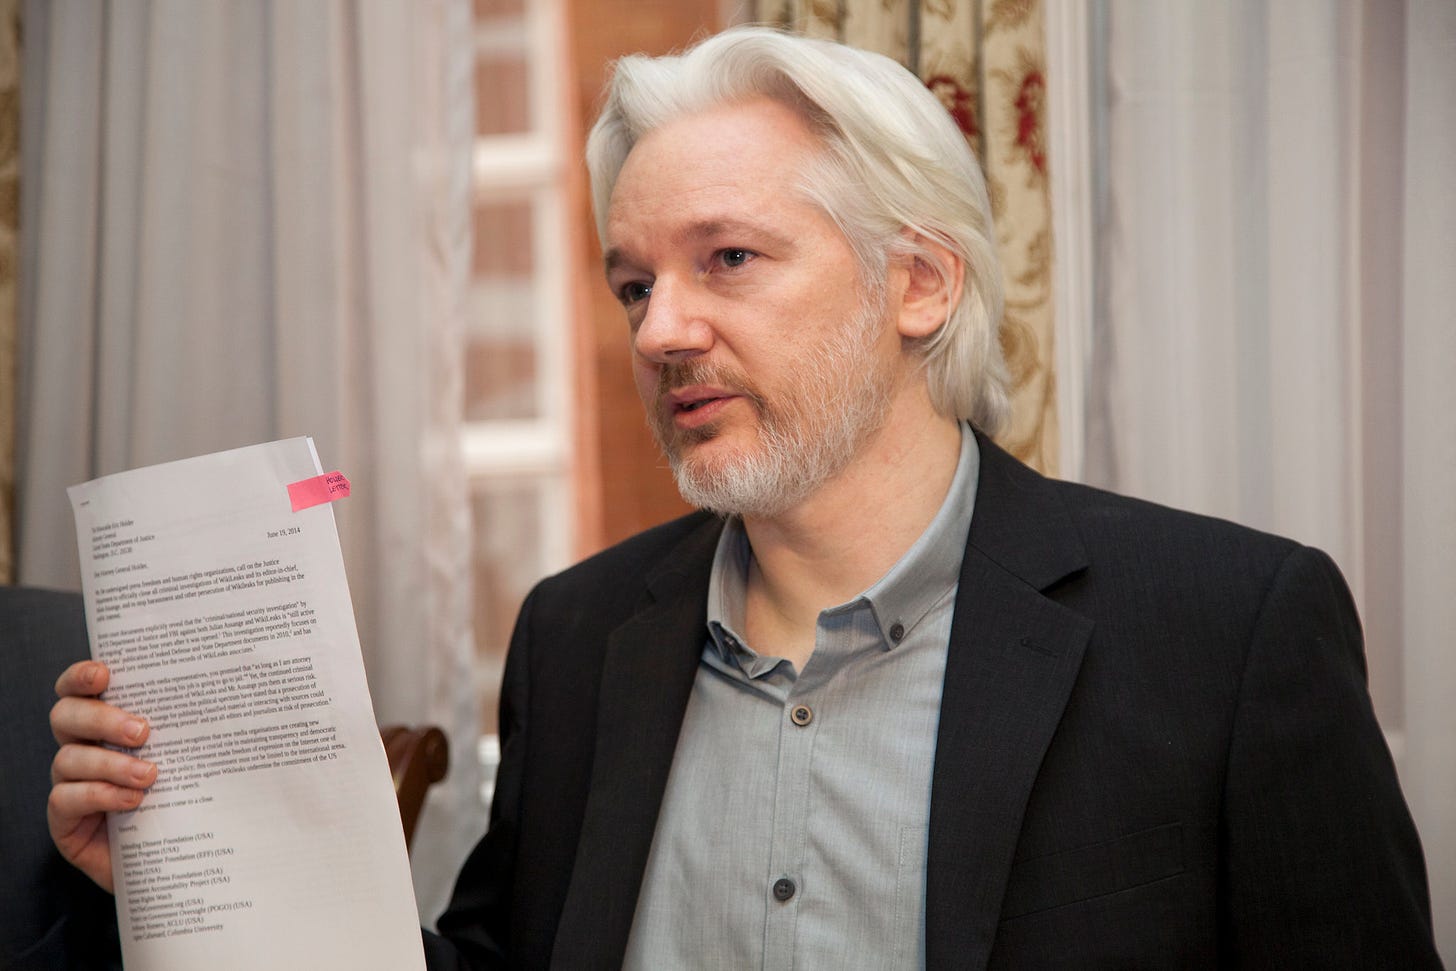 WikiLeaks co-founder and publisher Julian Assange holds a stack of documents during a press event. He's wearing a gray shirt and black suit coat.